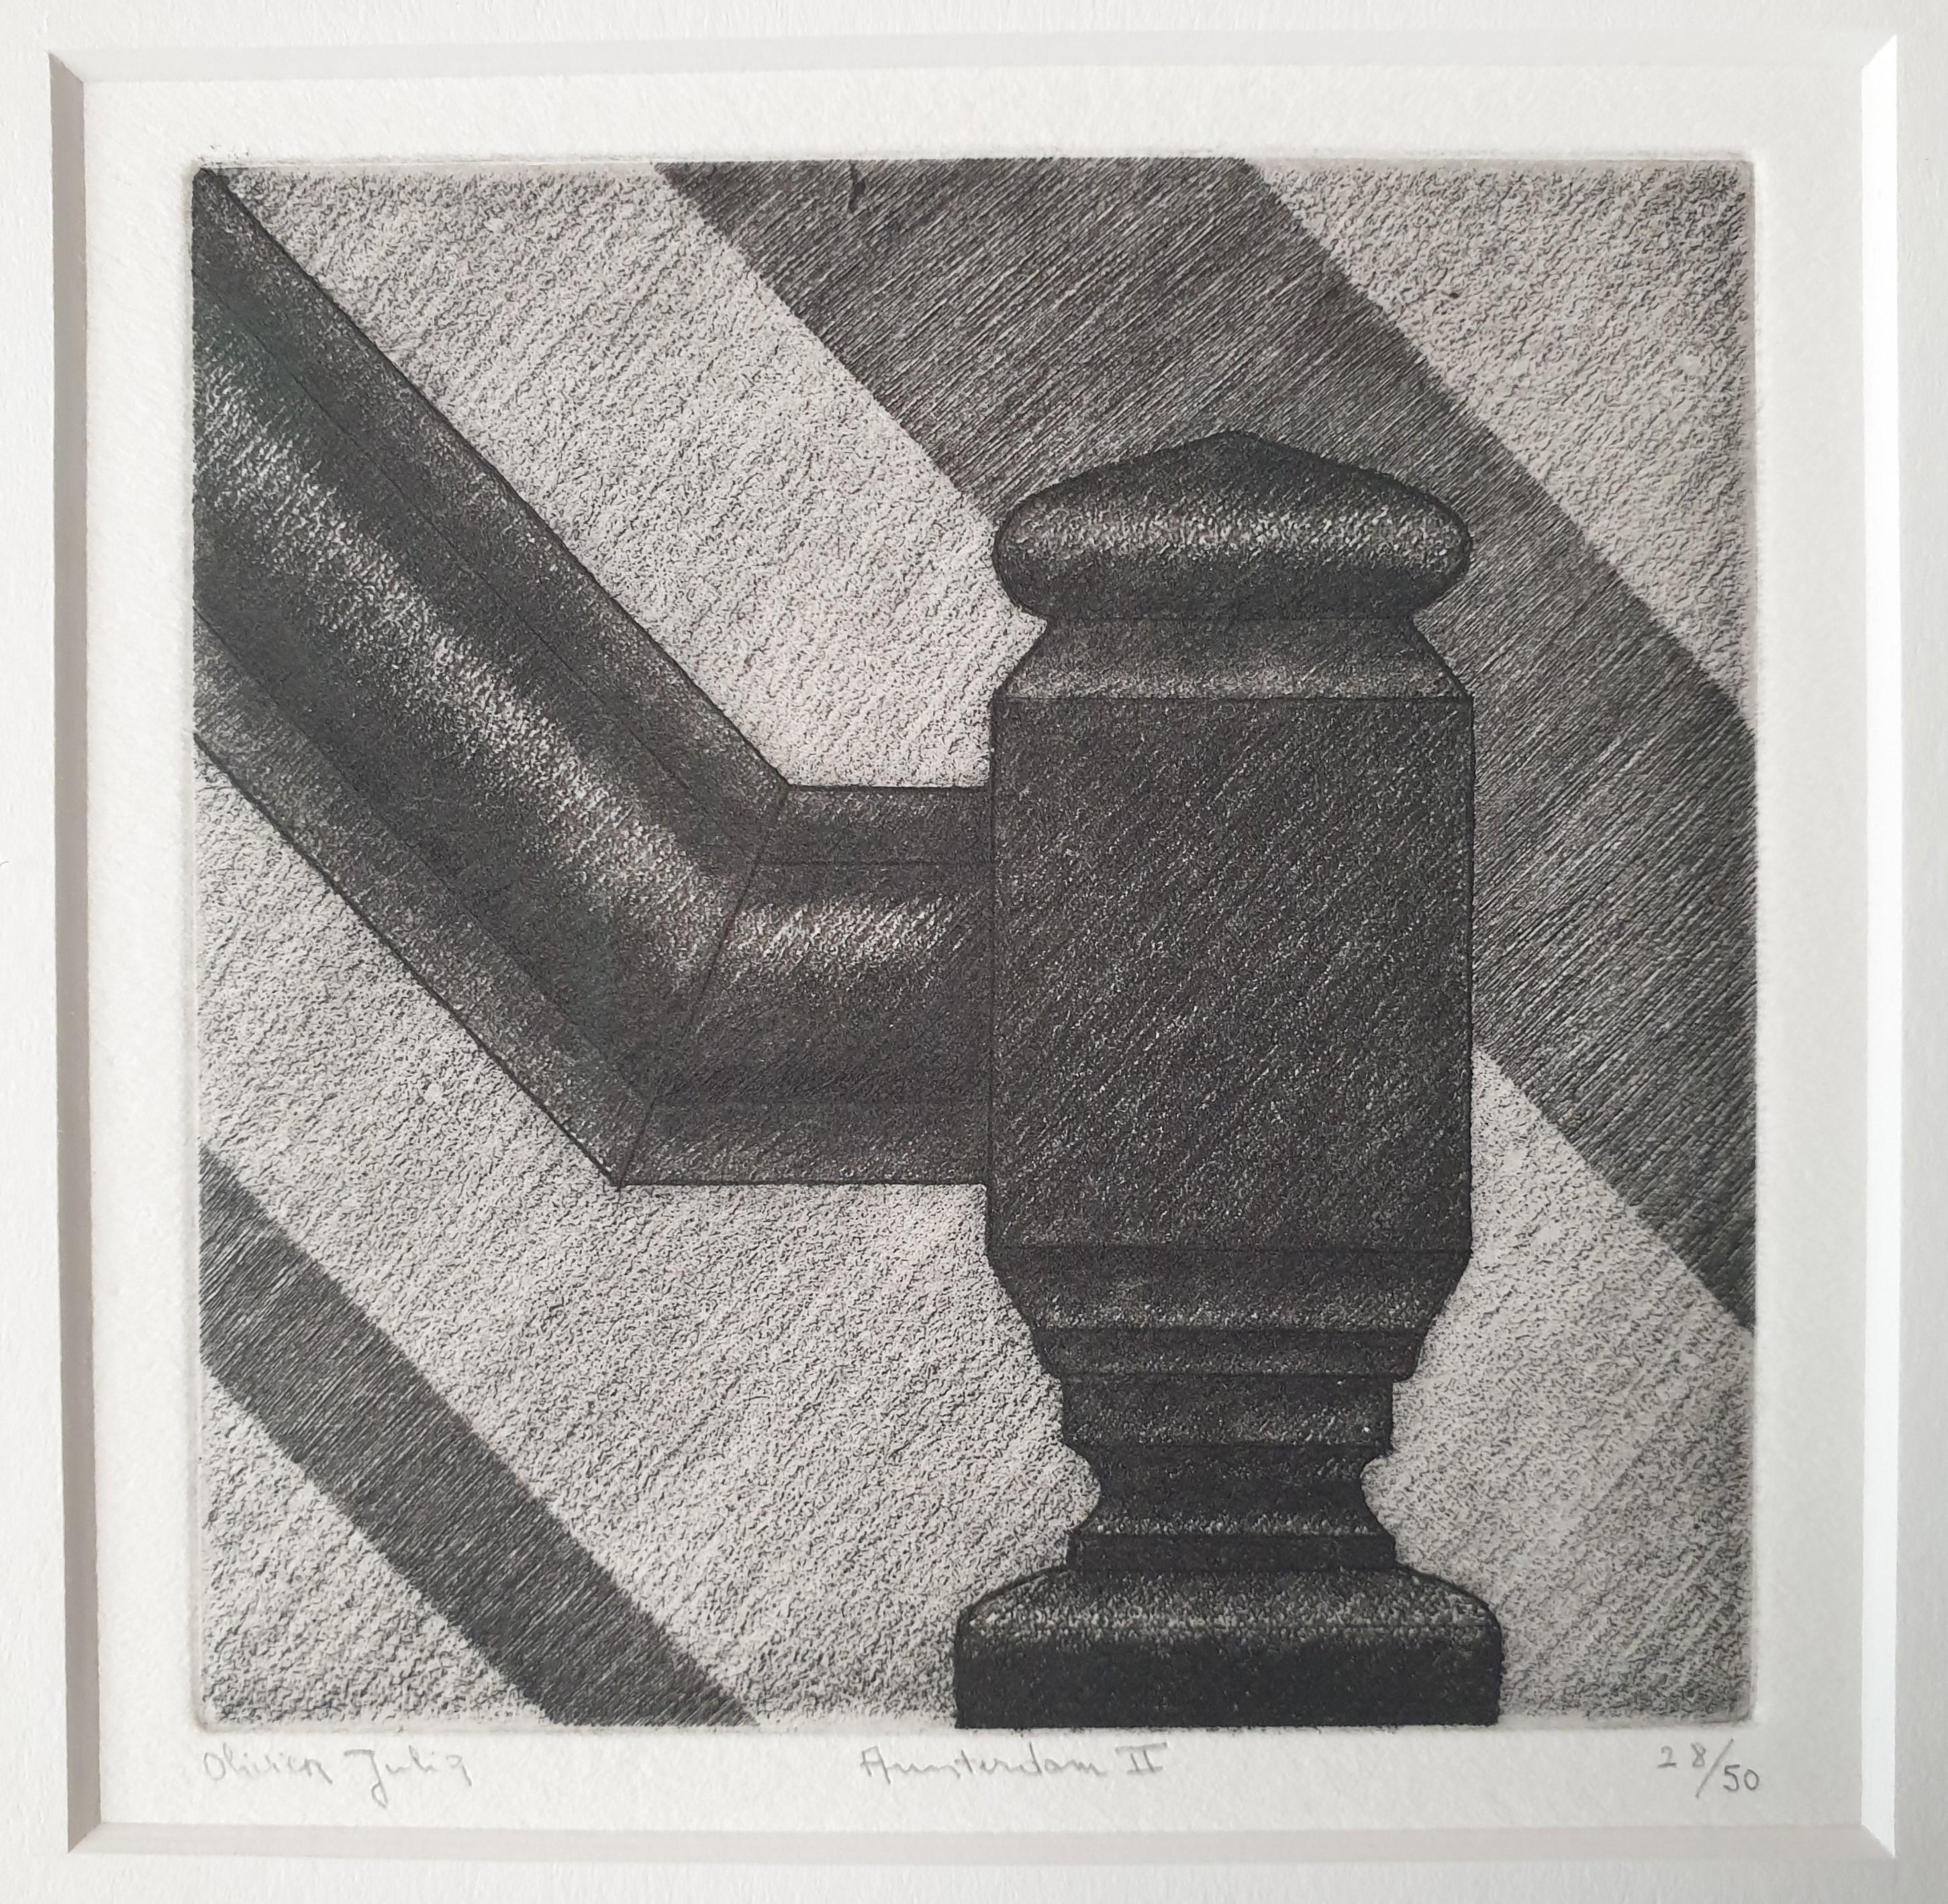 Amsterdam II is an intriguing early career aquatint dry-needle etch print by renowned French-Dutch artist Olivier Julia. It depicts a detail of an old Amsterdam house facade is both abstract and realistic at the same time. The paper used is 240